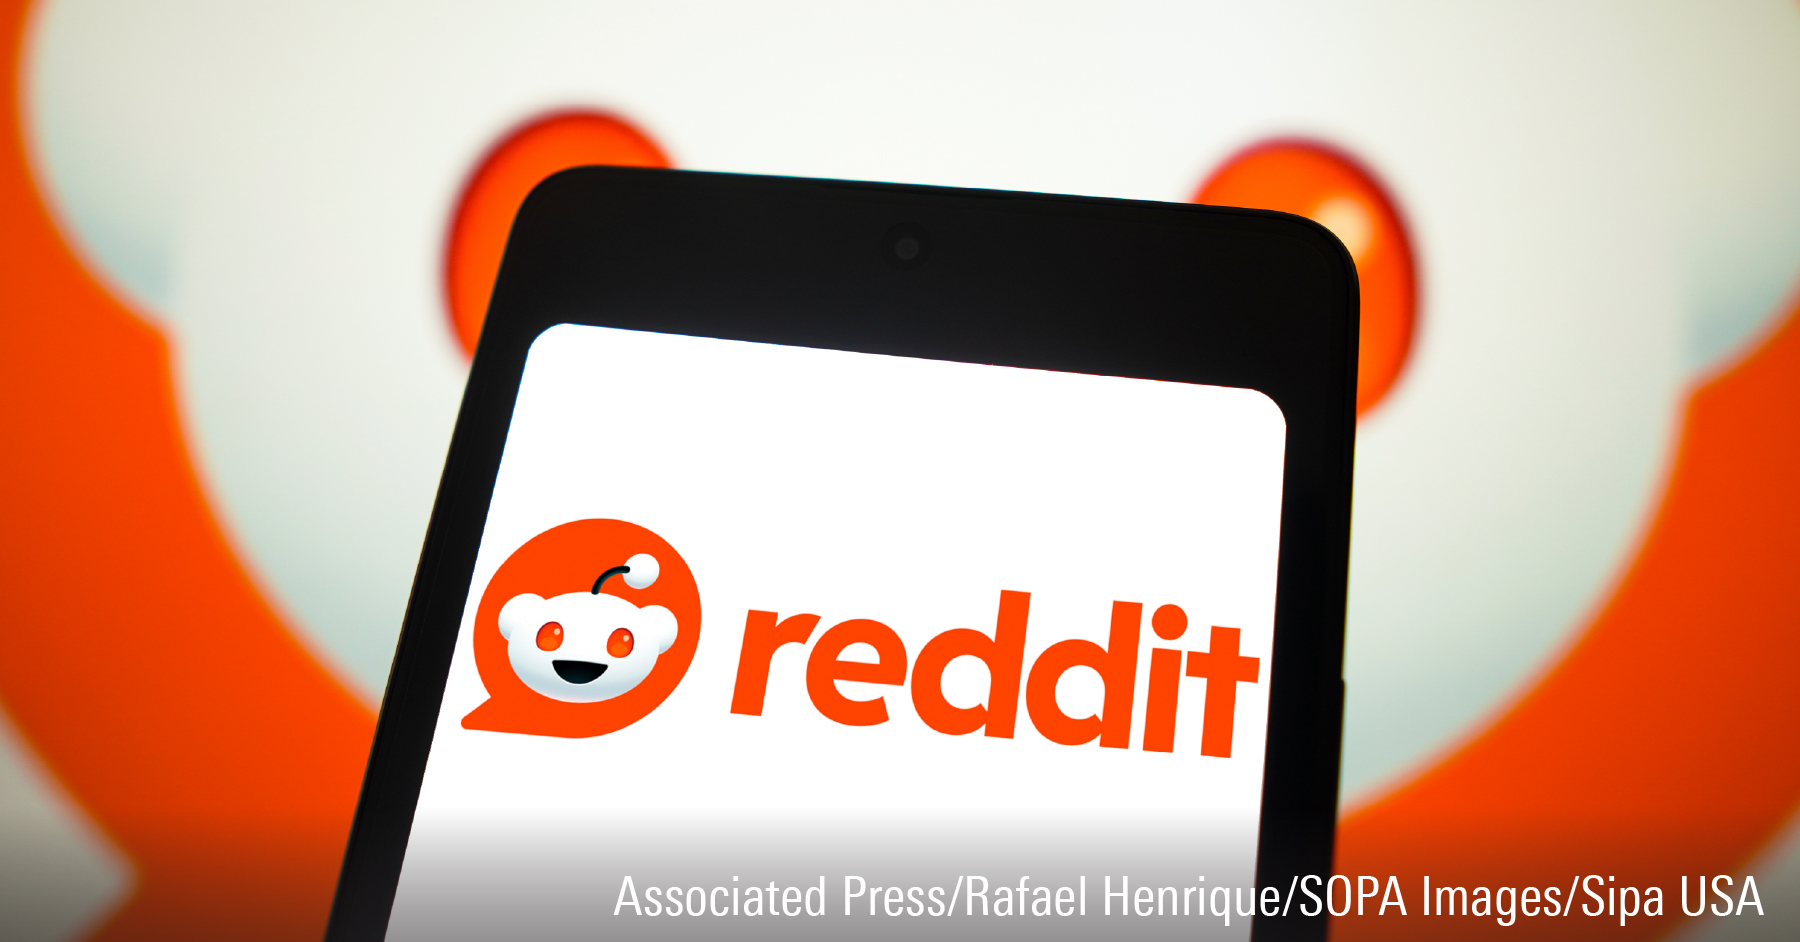 In this photo illustration, the Reddit logo is displayed on a smartphone screen and in the background.